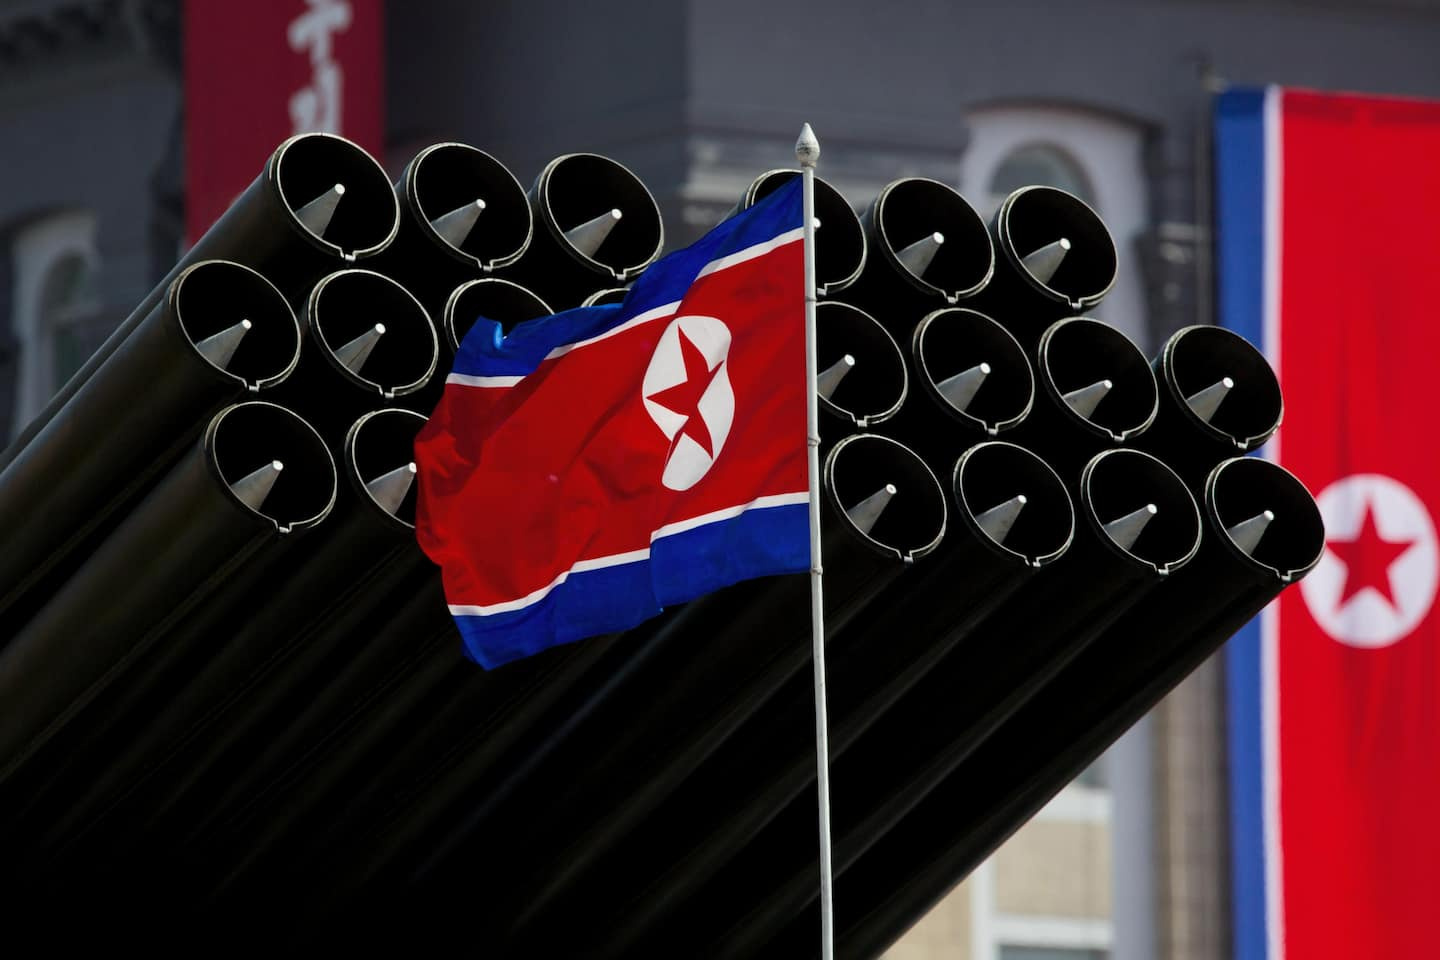 In the event of a North Korean nuclear test, the United States will seek sanctions from the UN